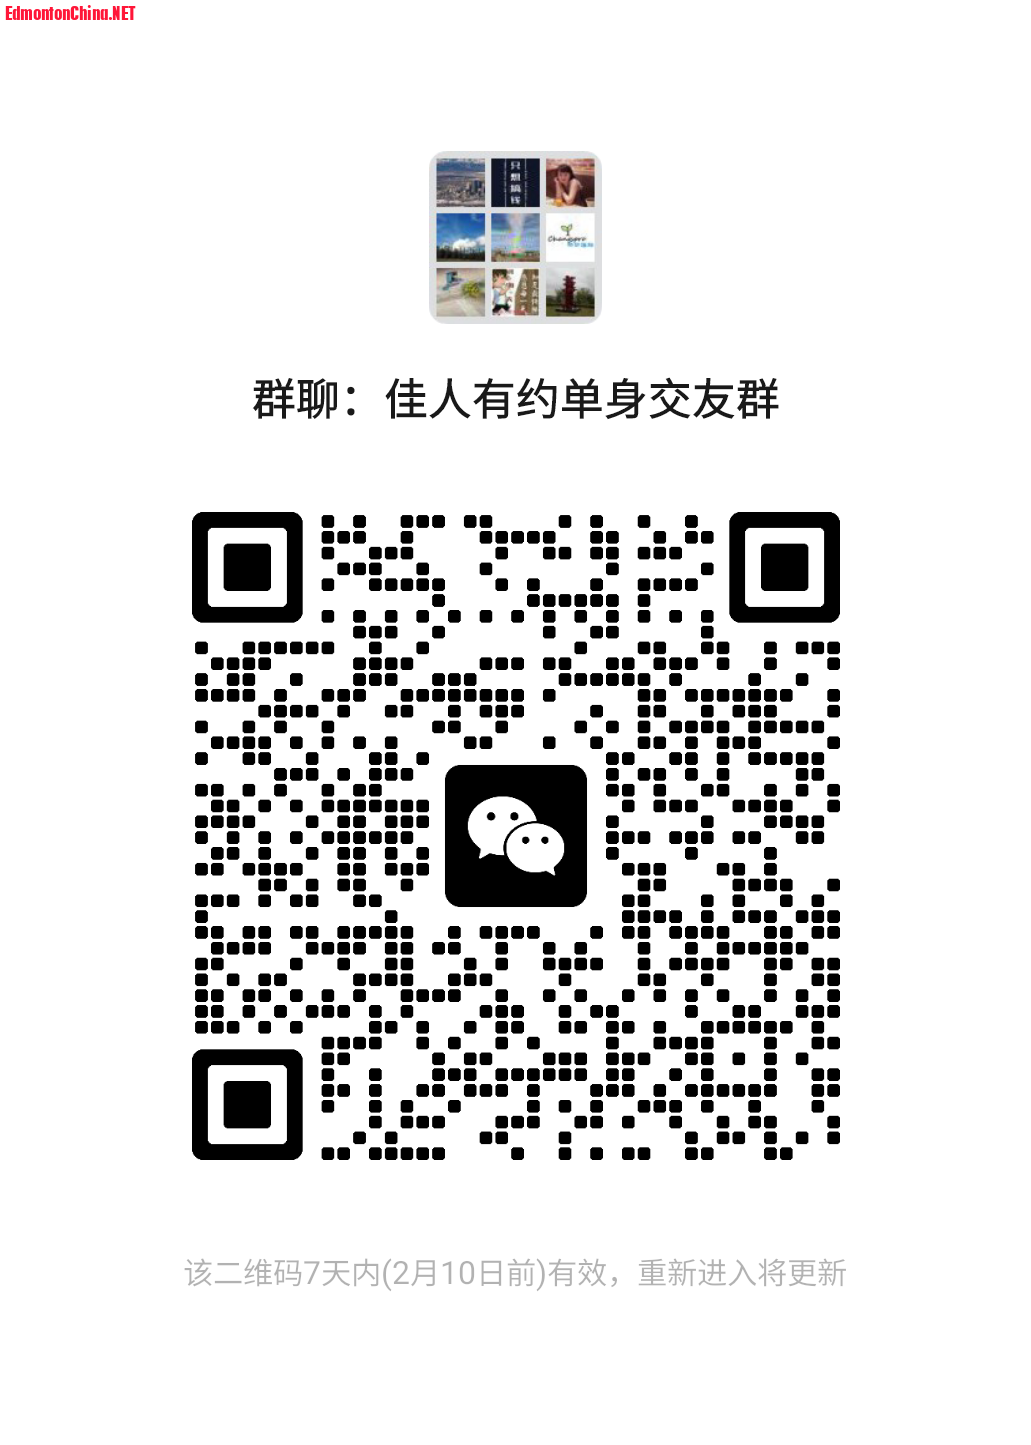 mmqrcode1706976930487.png